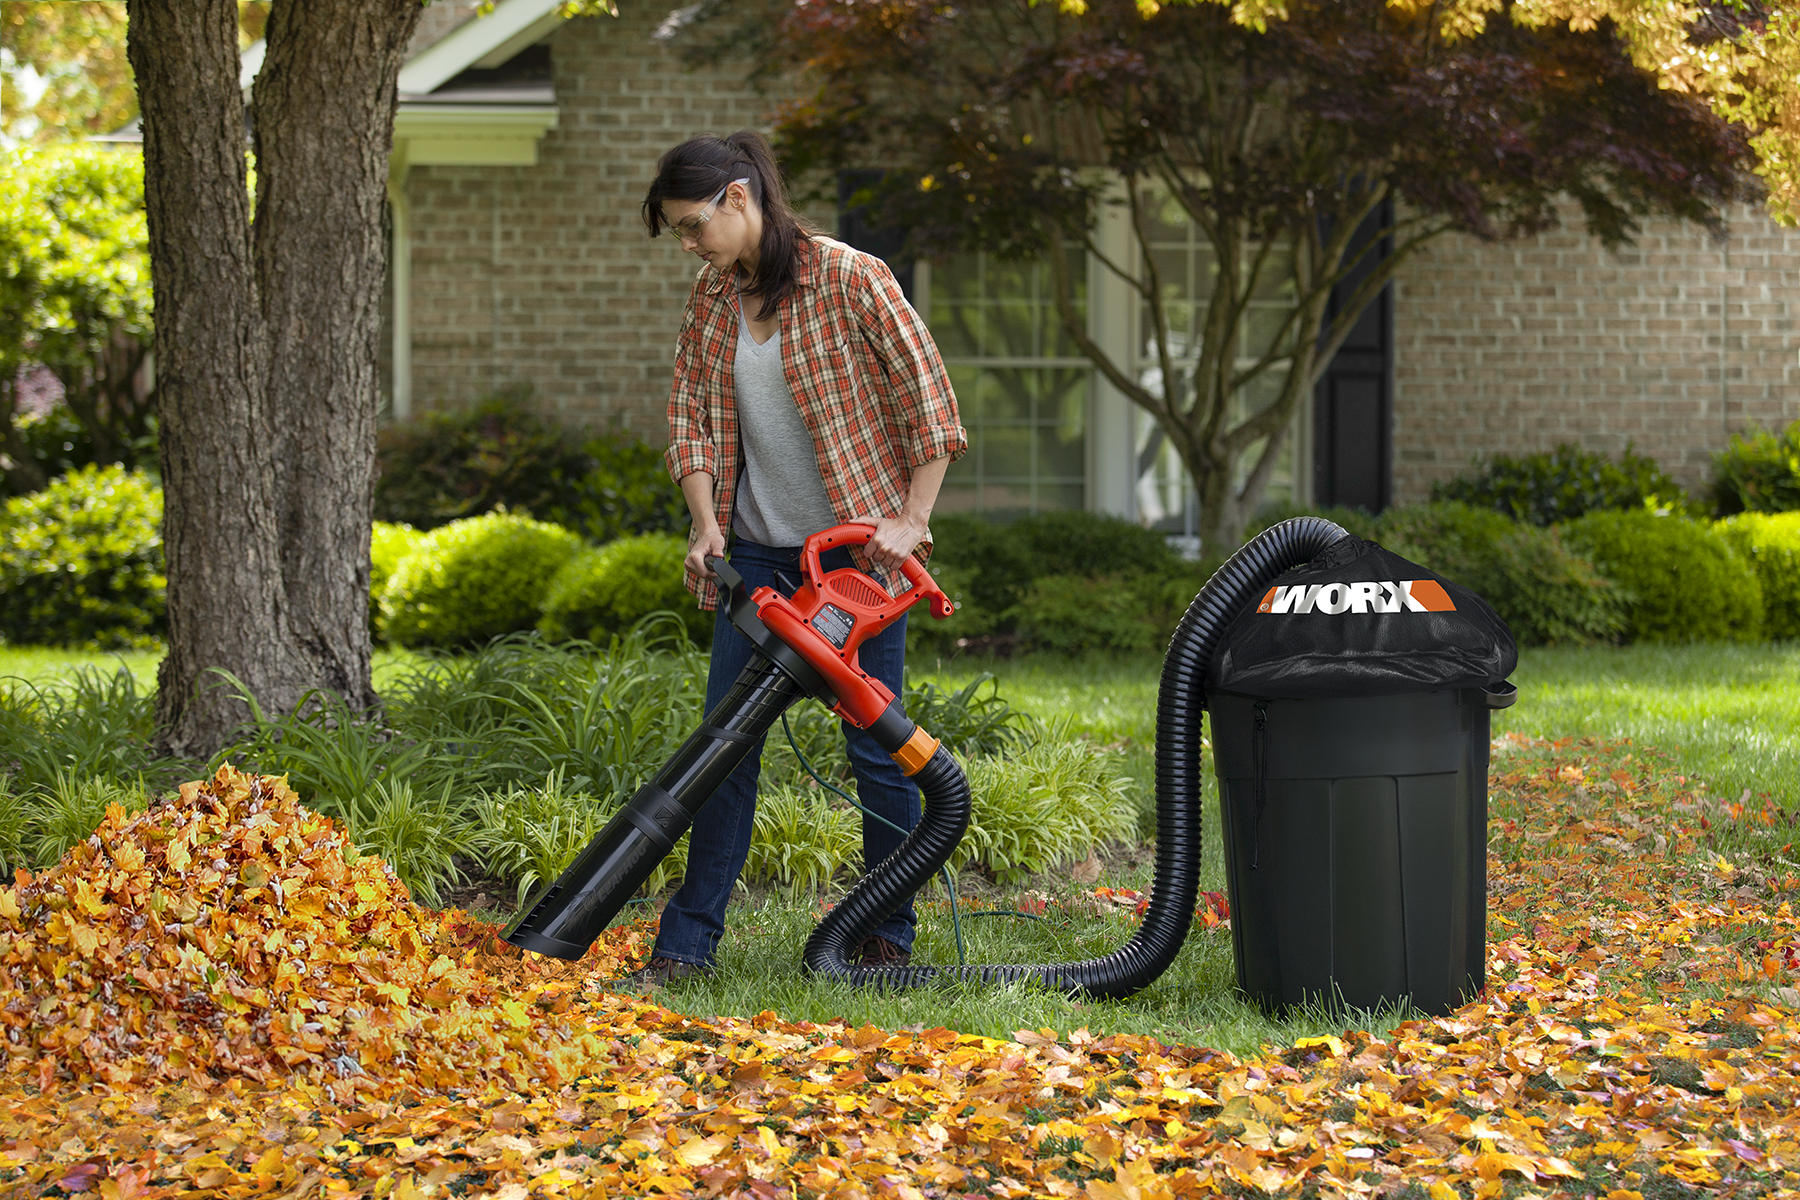 WORX LeafPro High Capacity Universal Collection System is a perfect complement to TRIVAC and other major brands of blower/mulcher/vacs.